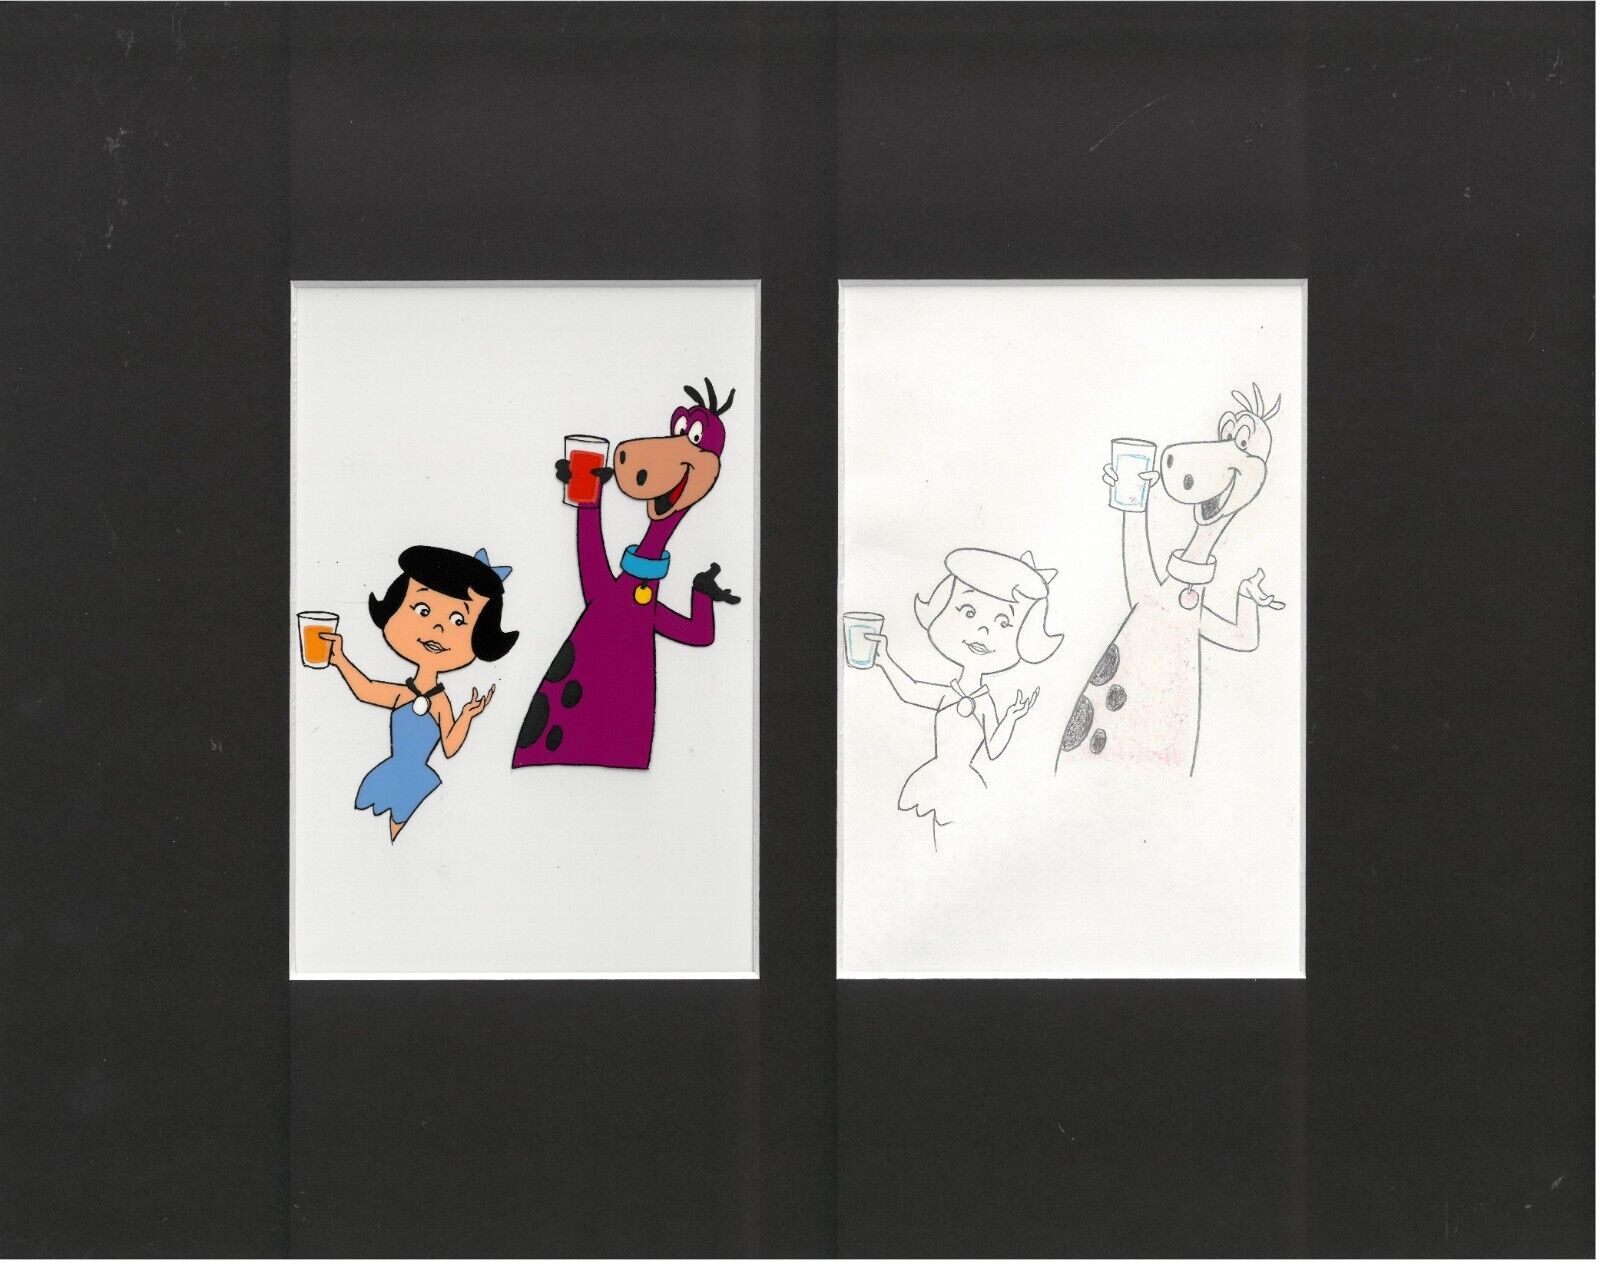 Flintstones -Original Production Cel with Matching Drawing -Betty Rubble & Dino